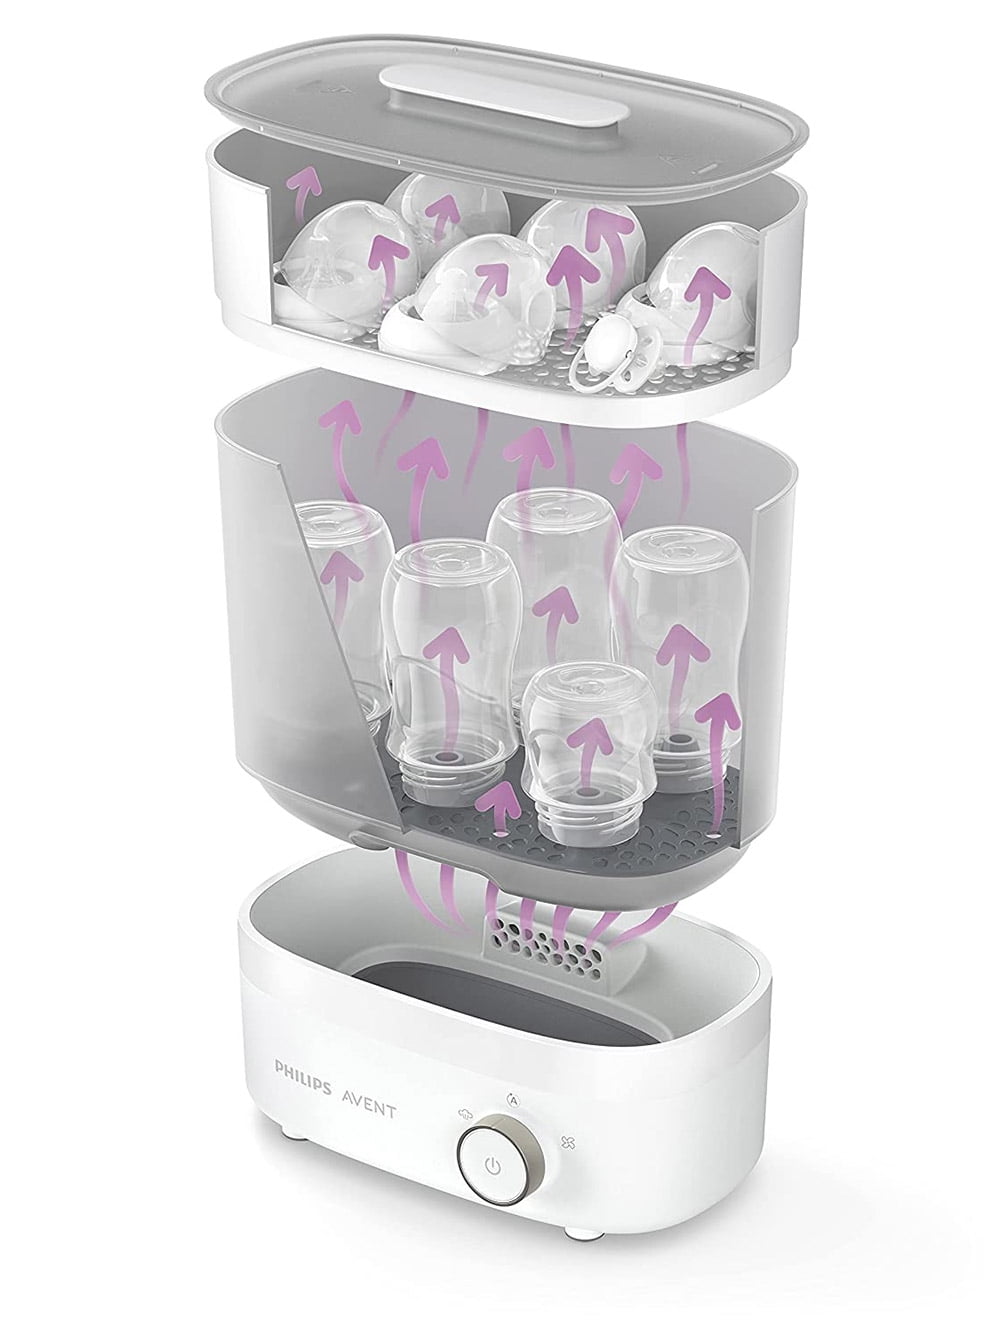 The First Years Y4572 Electric Steam Bottle Sterilizer for sale online